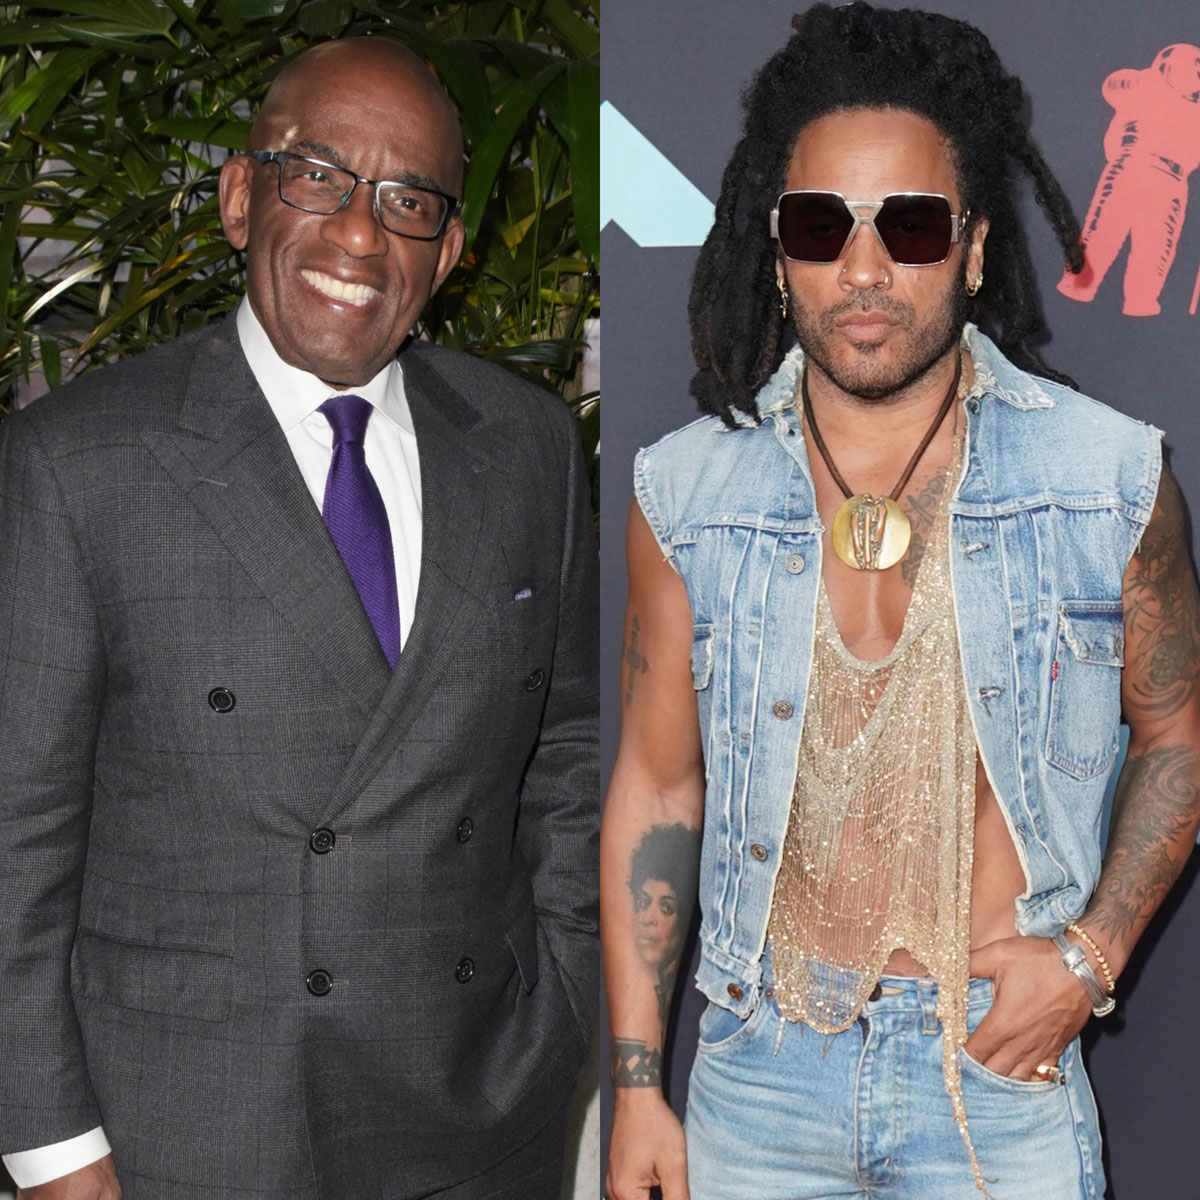 Al Roker and Lenny Kravitz are related